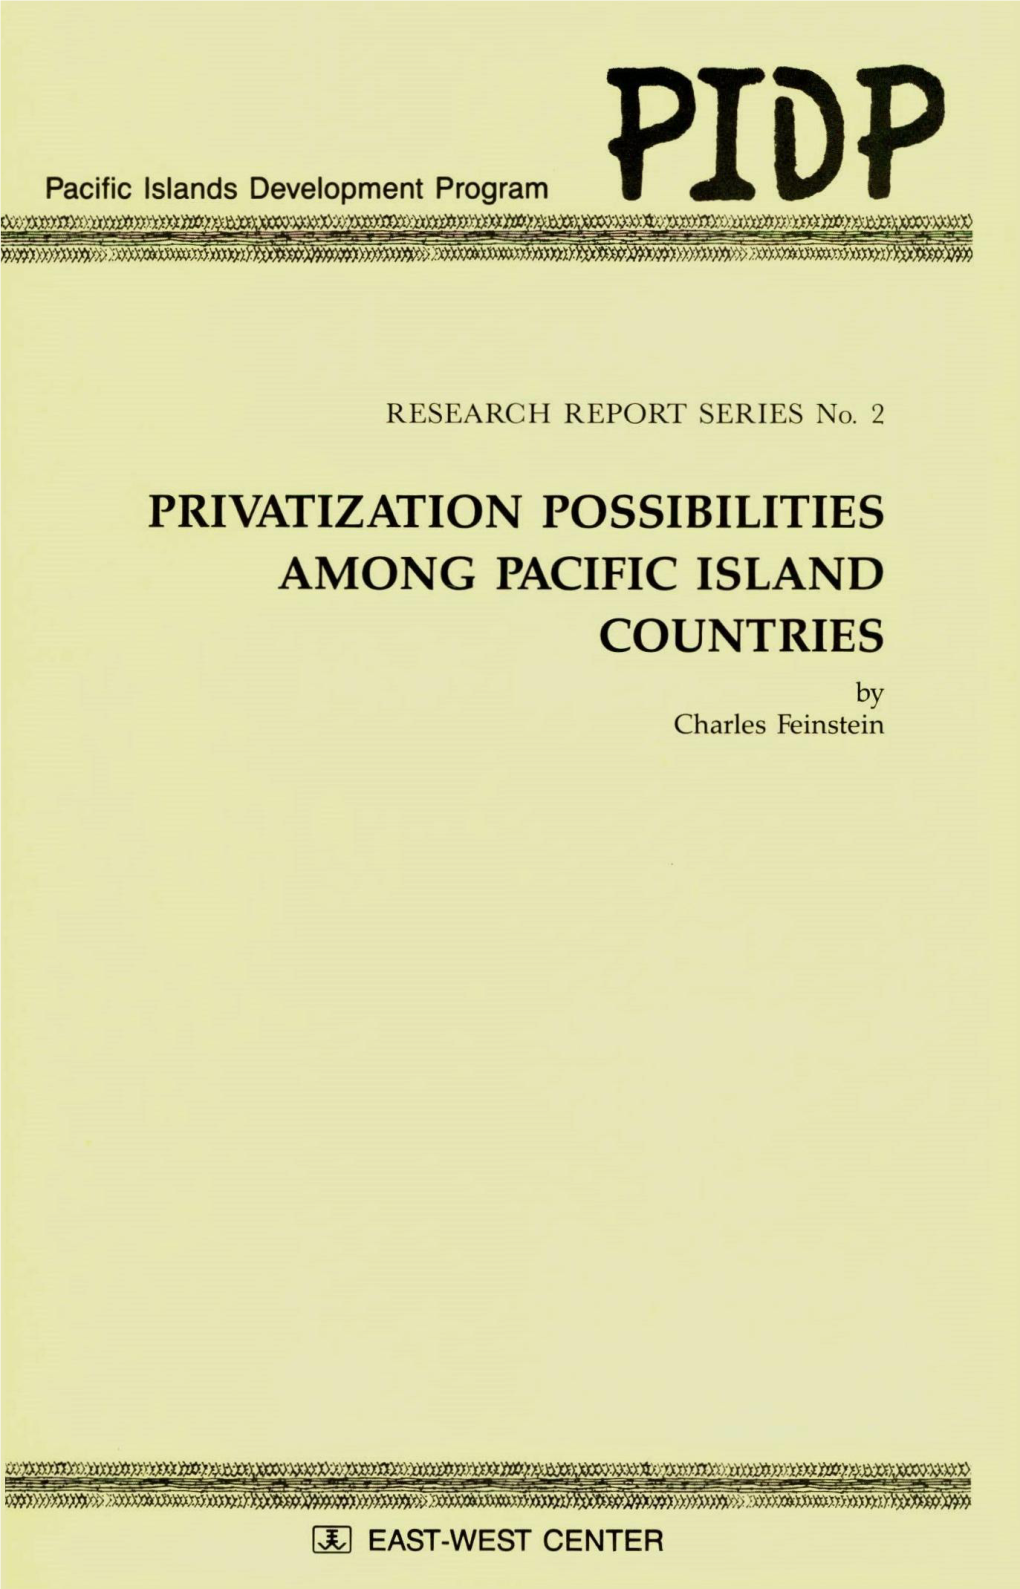 PRIVATIZATION POSSIBILITIES AMONG PACIFIC ISLAND COUNTRIES by Charles Feinstein